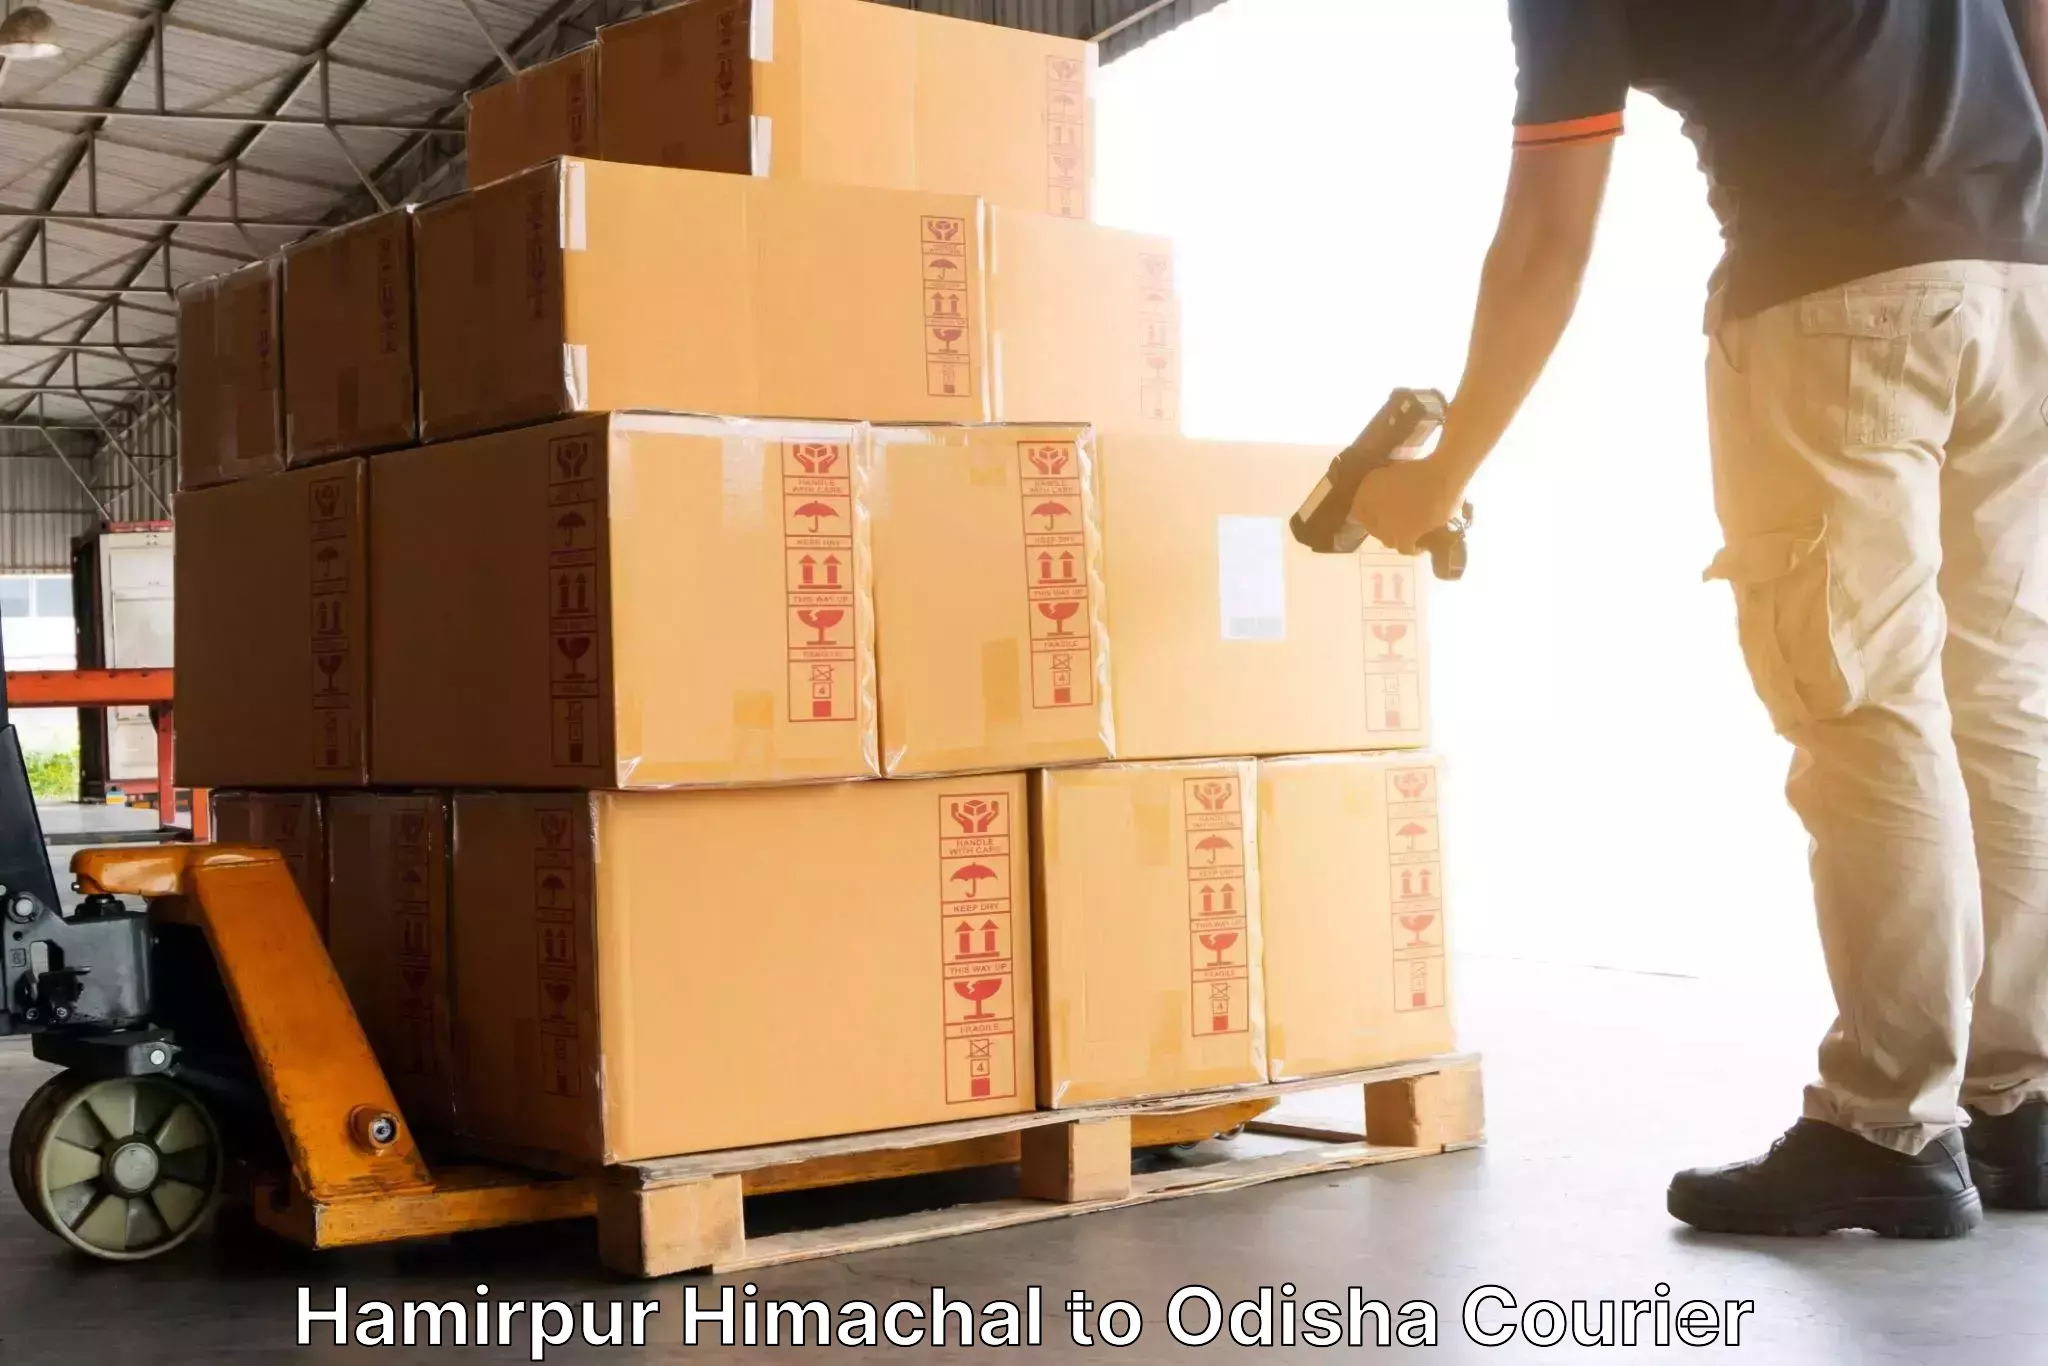 End-to-end delivery Hamirpur Himachal to Udala